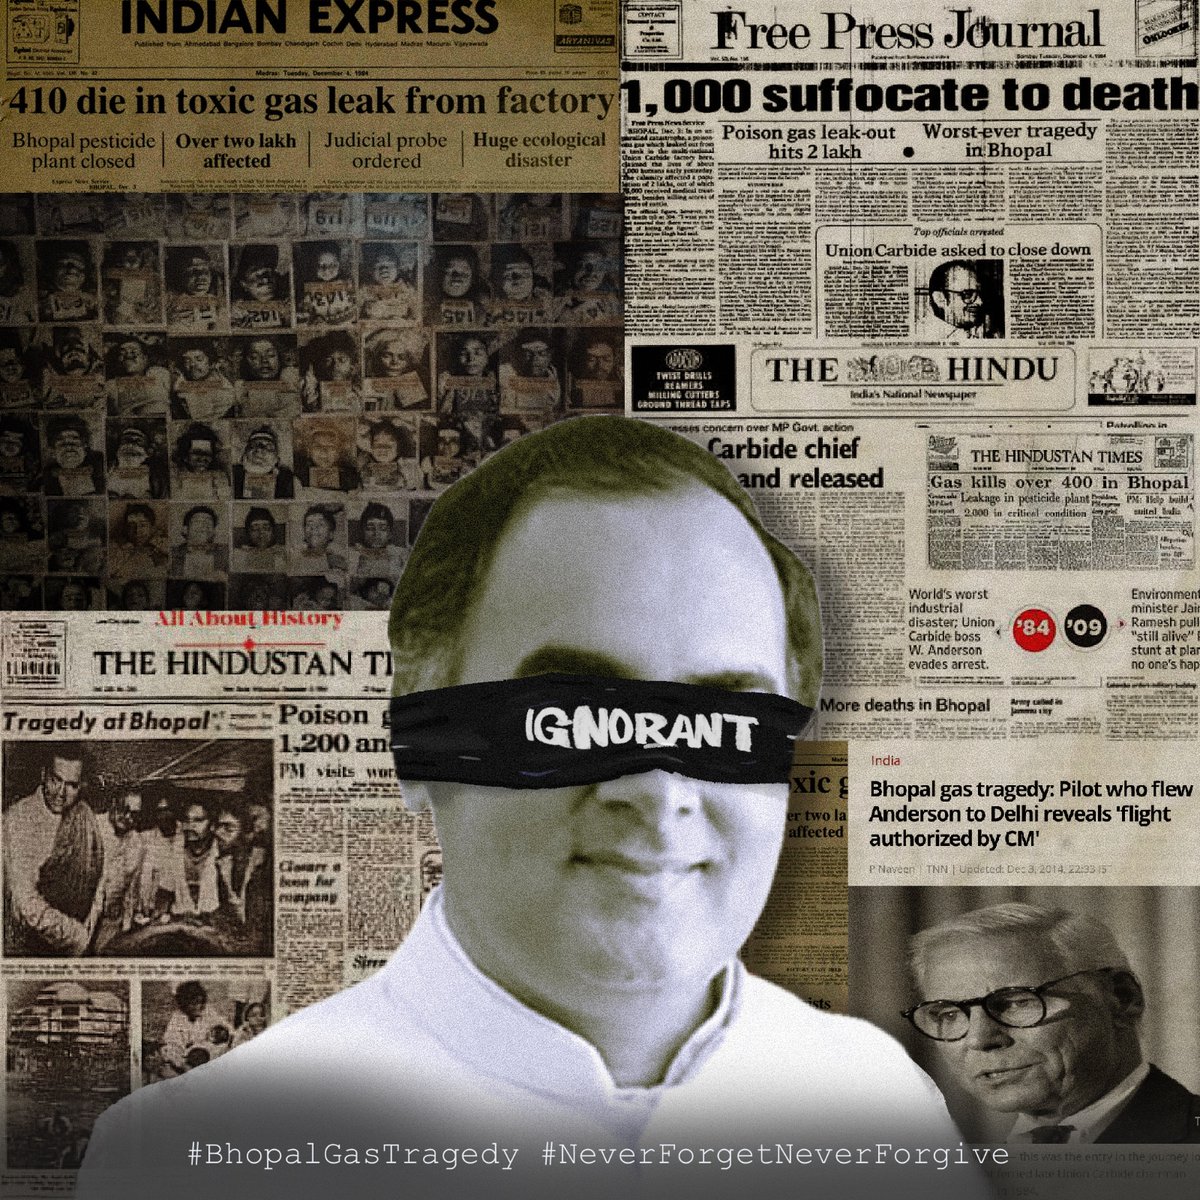 This is how they turned blind eye to every disaster! 

Never Forget, Never Forgive!

#BhopalGasTragedy
#Ignorance
#Congress